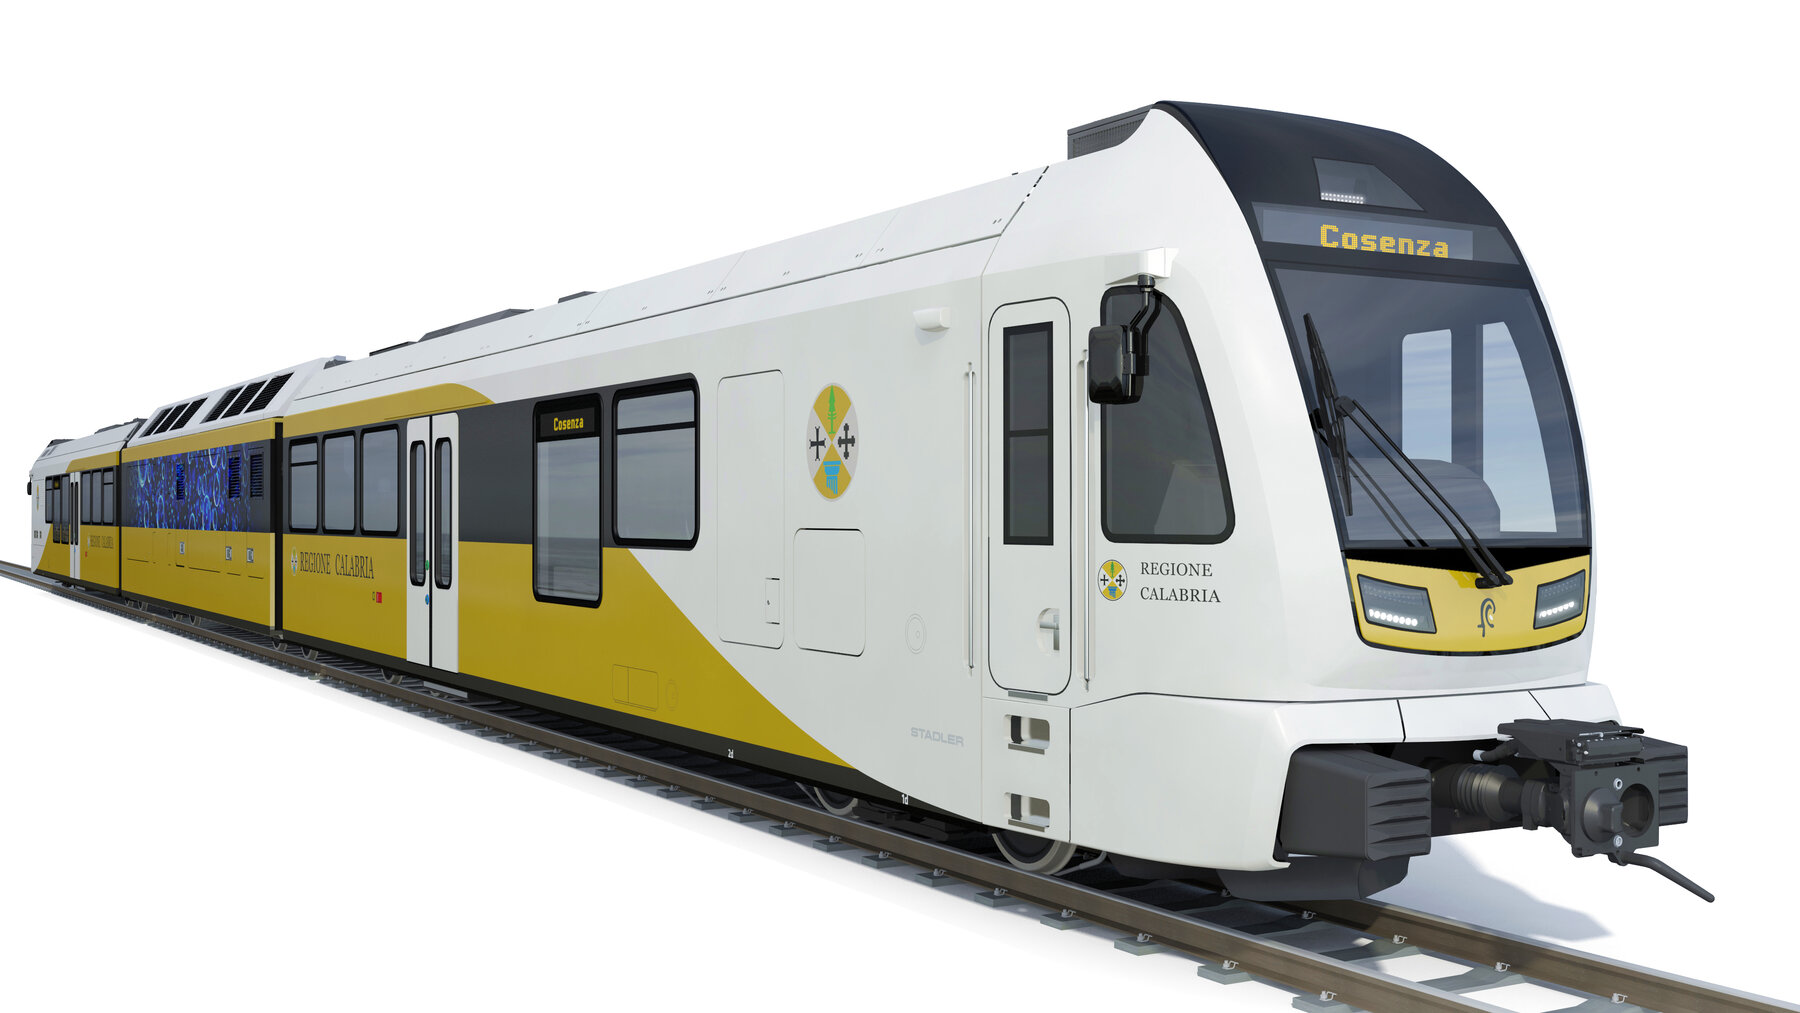 Visualisation of the hydrogen train for FdC in Calabria